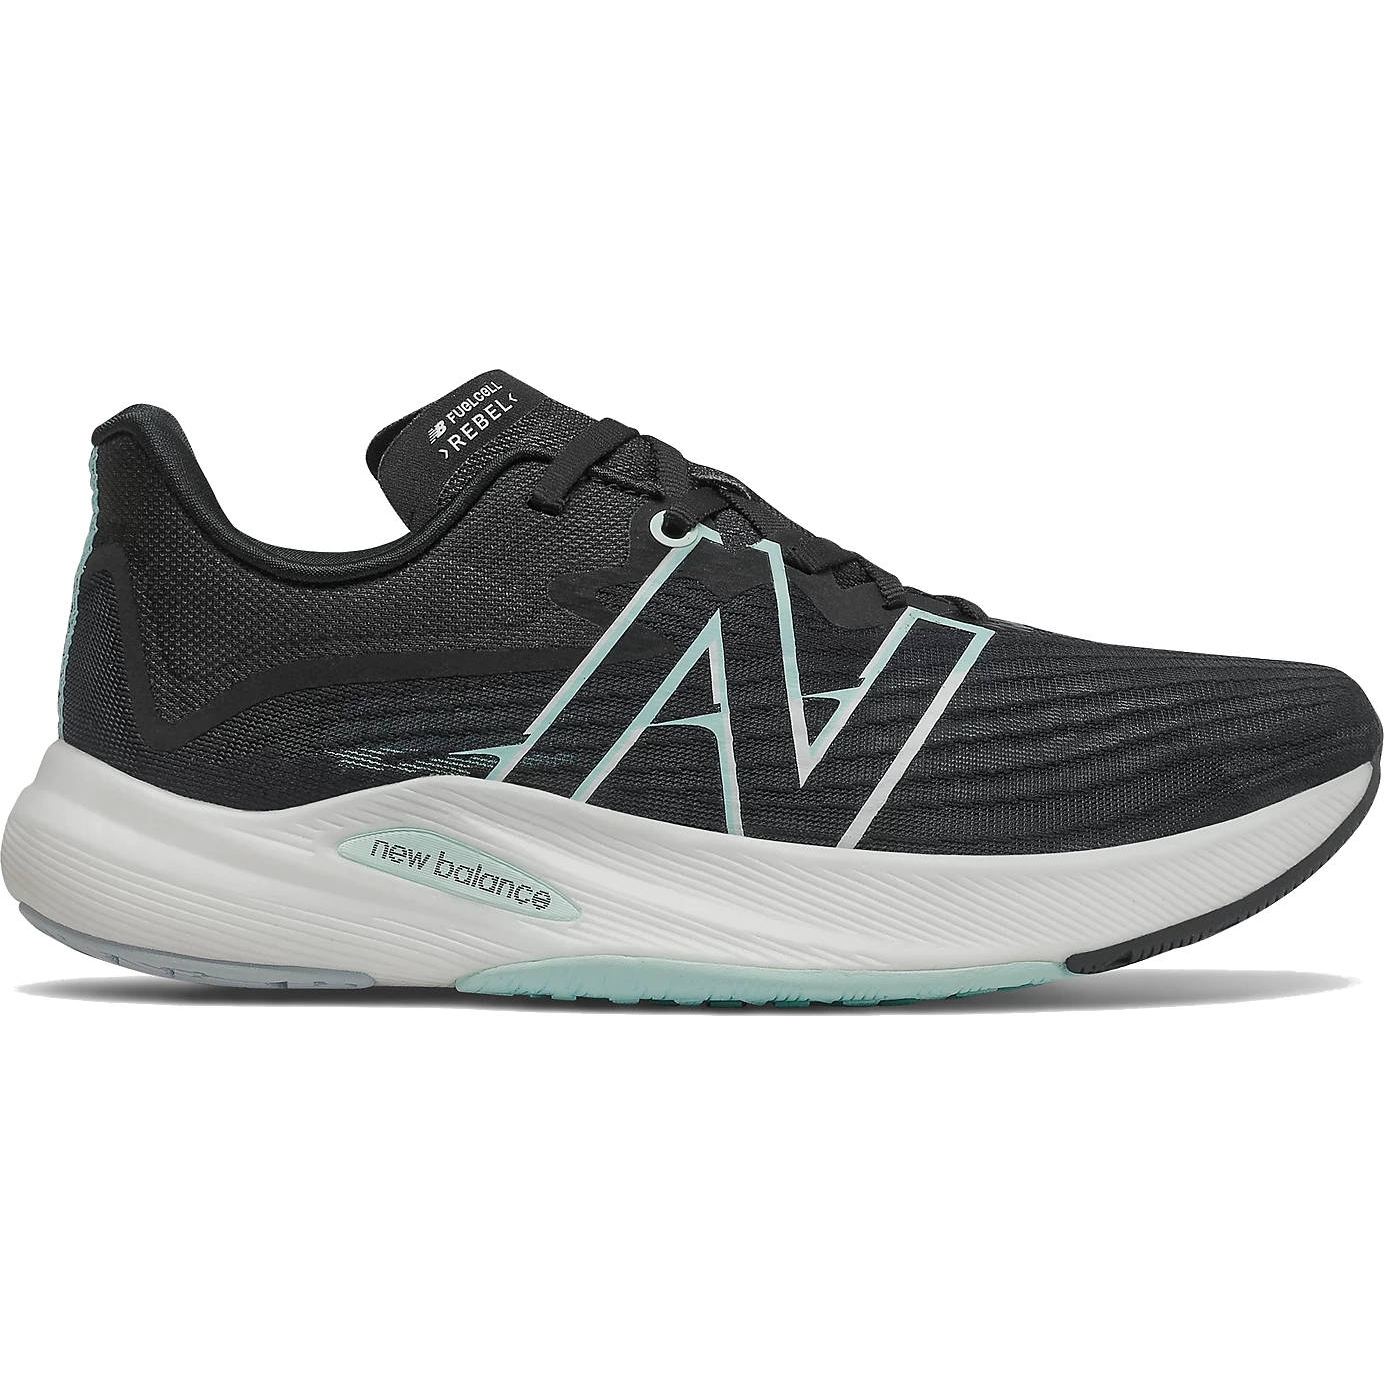 Productfoto van New Balance FuelCell Rebel v2 Women&#039;s Running Shoes - Black/White Mint